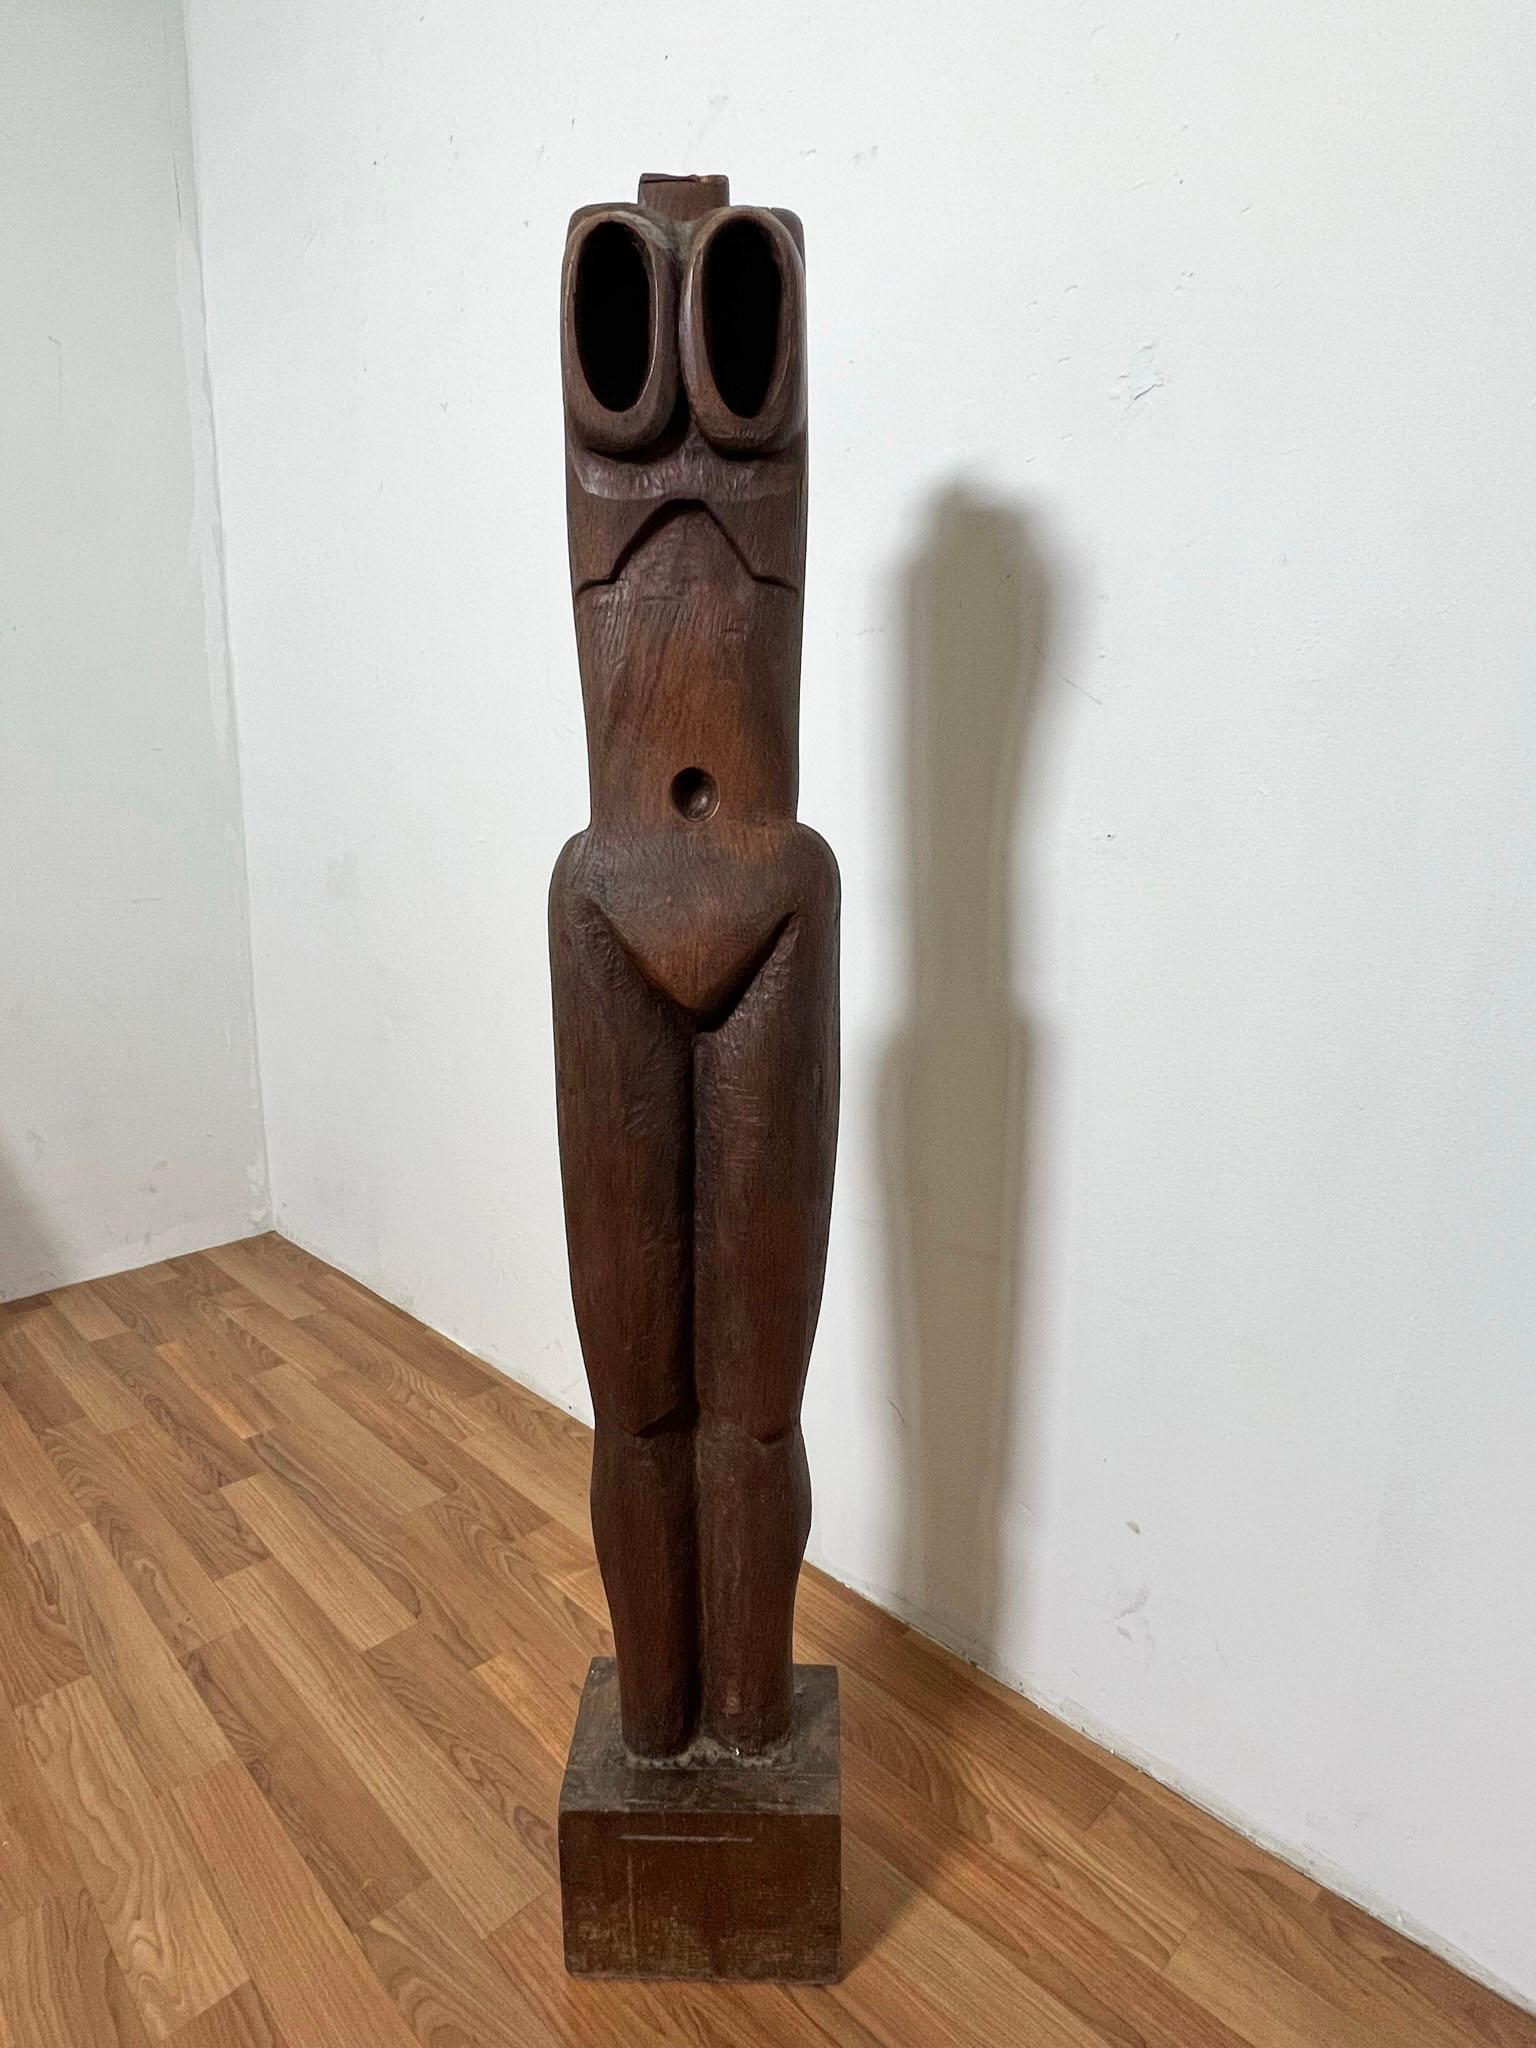 A modernist female totem, carved wood, by an unknown sculptor from the Montserrat College of Art, circa 1970s.